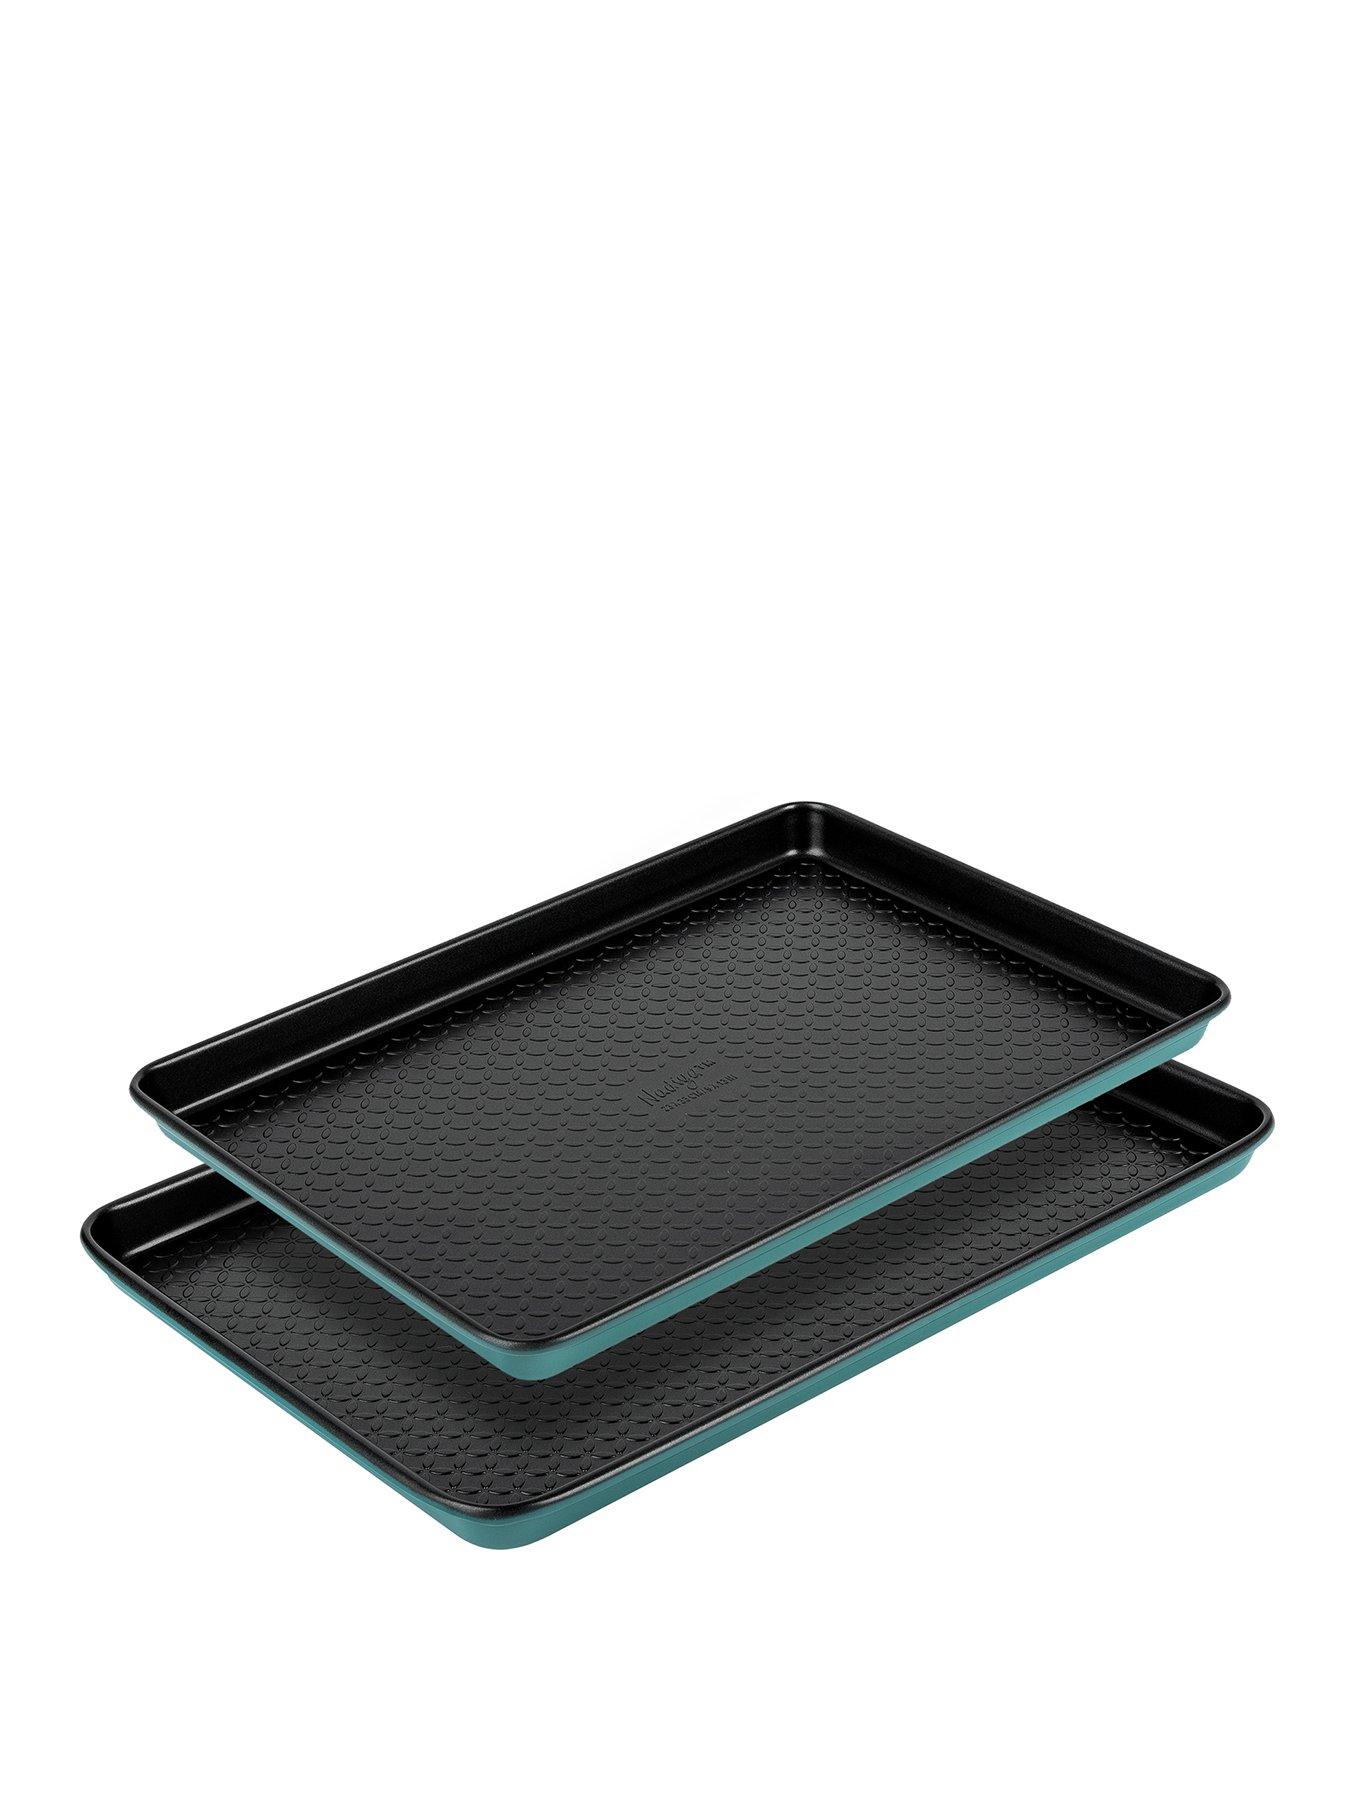 41cm Bronze Baking Tray Twin Pack British Made with Double Coated Non Stick by Lets Cook Cookware 